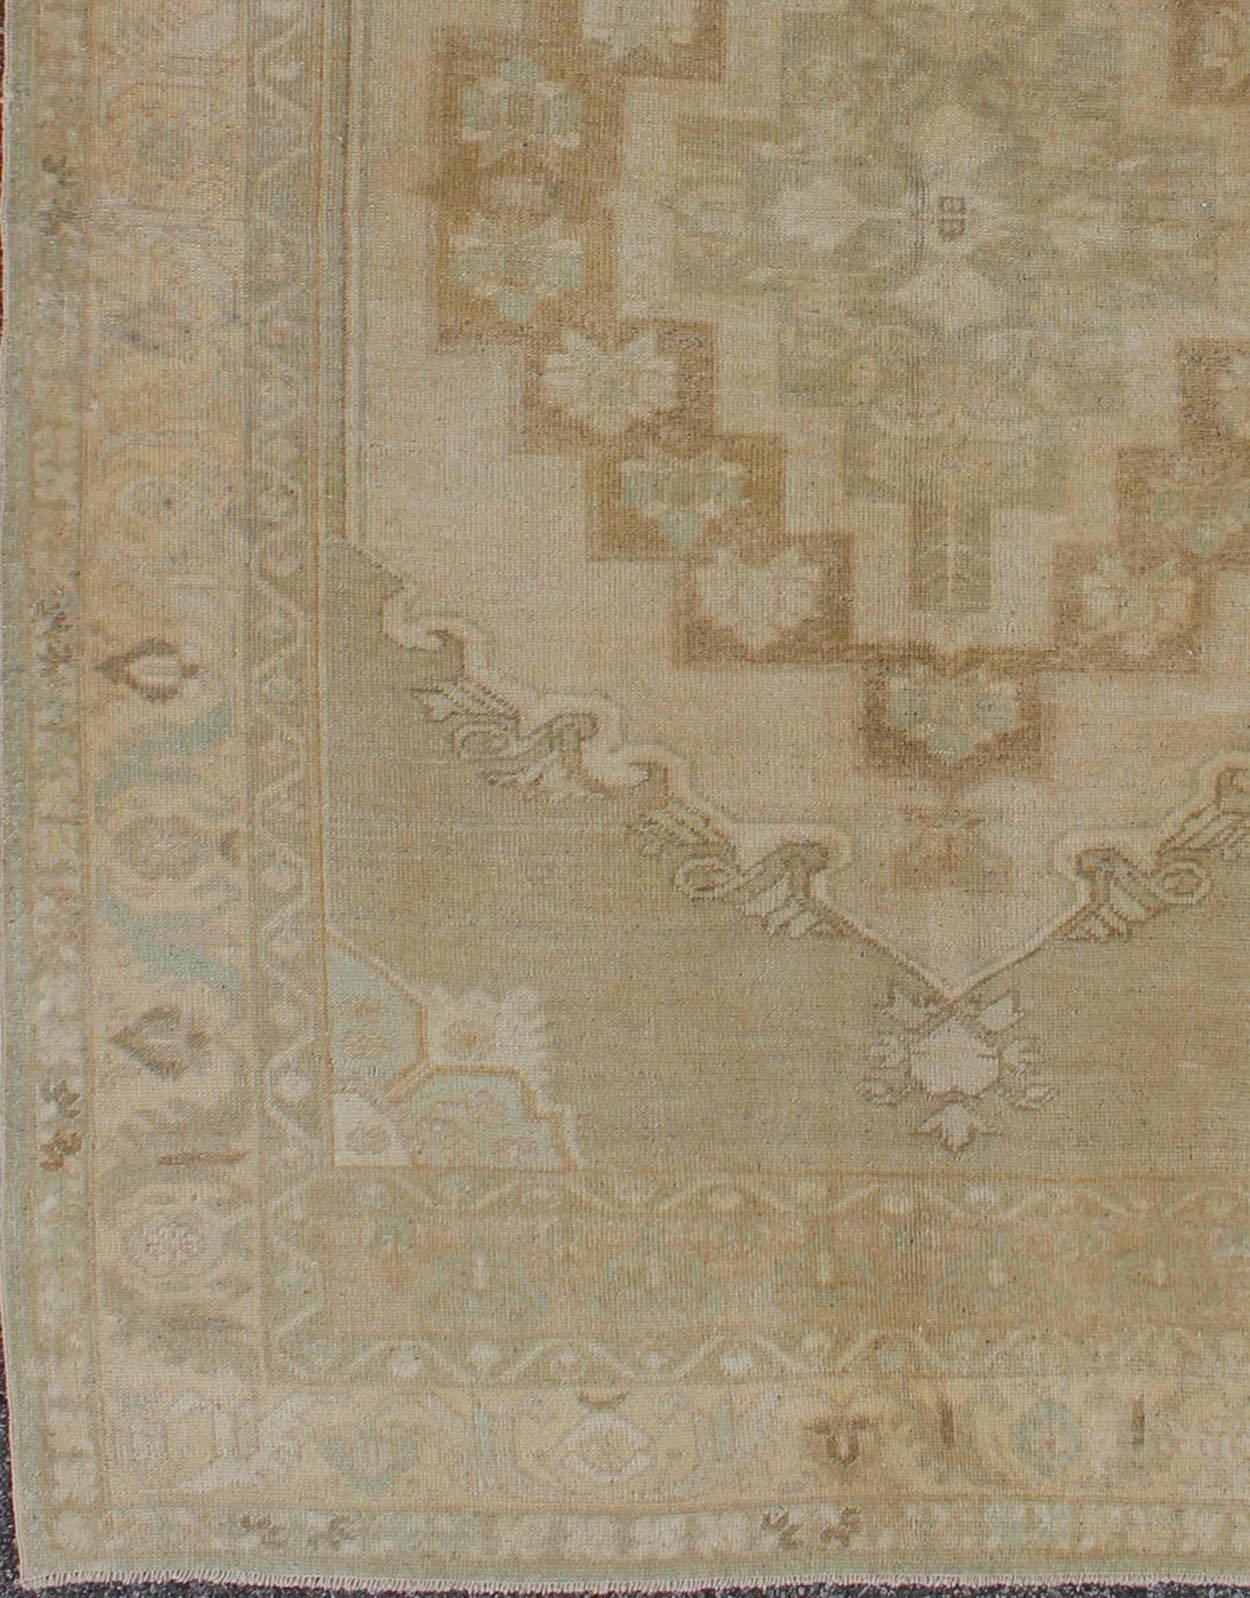 Faded Vintage Turkish Oushak Rug with Layered Medallion in Creams and Grays, rug en-112722, country of origin / type: Turkey / Oushak, circa 1940

This vintage Turkish Oushak rug features an intricately beautiful design. The central medallion is